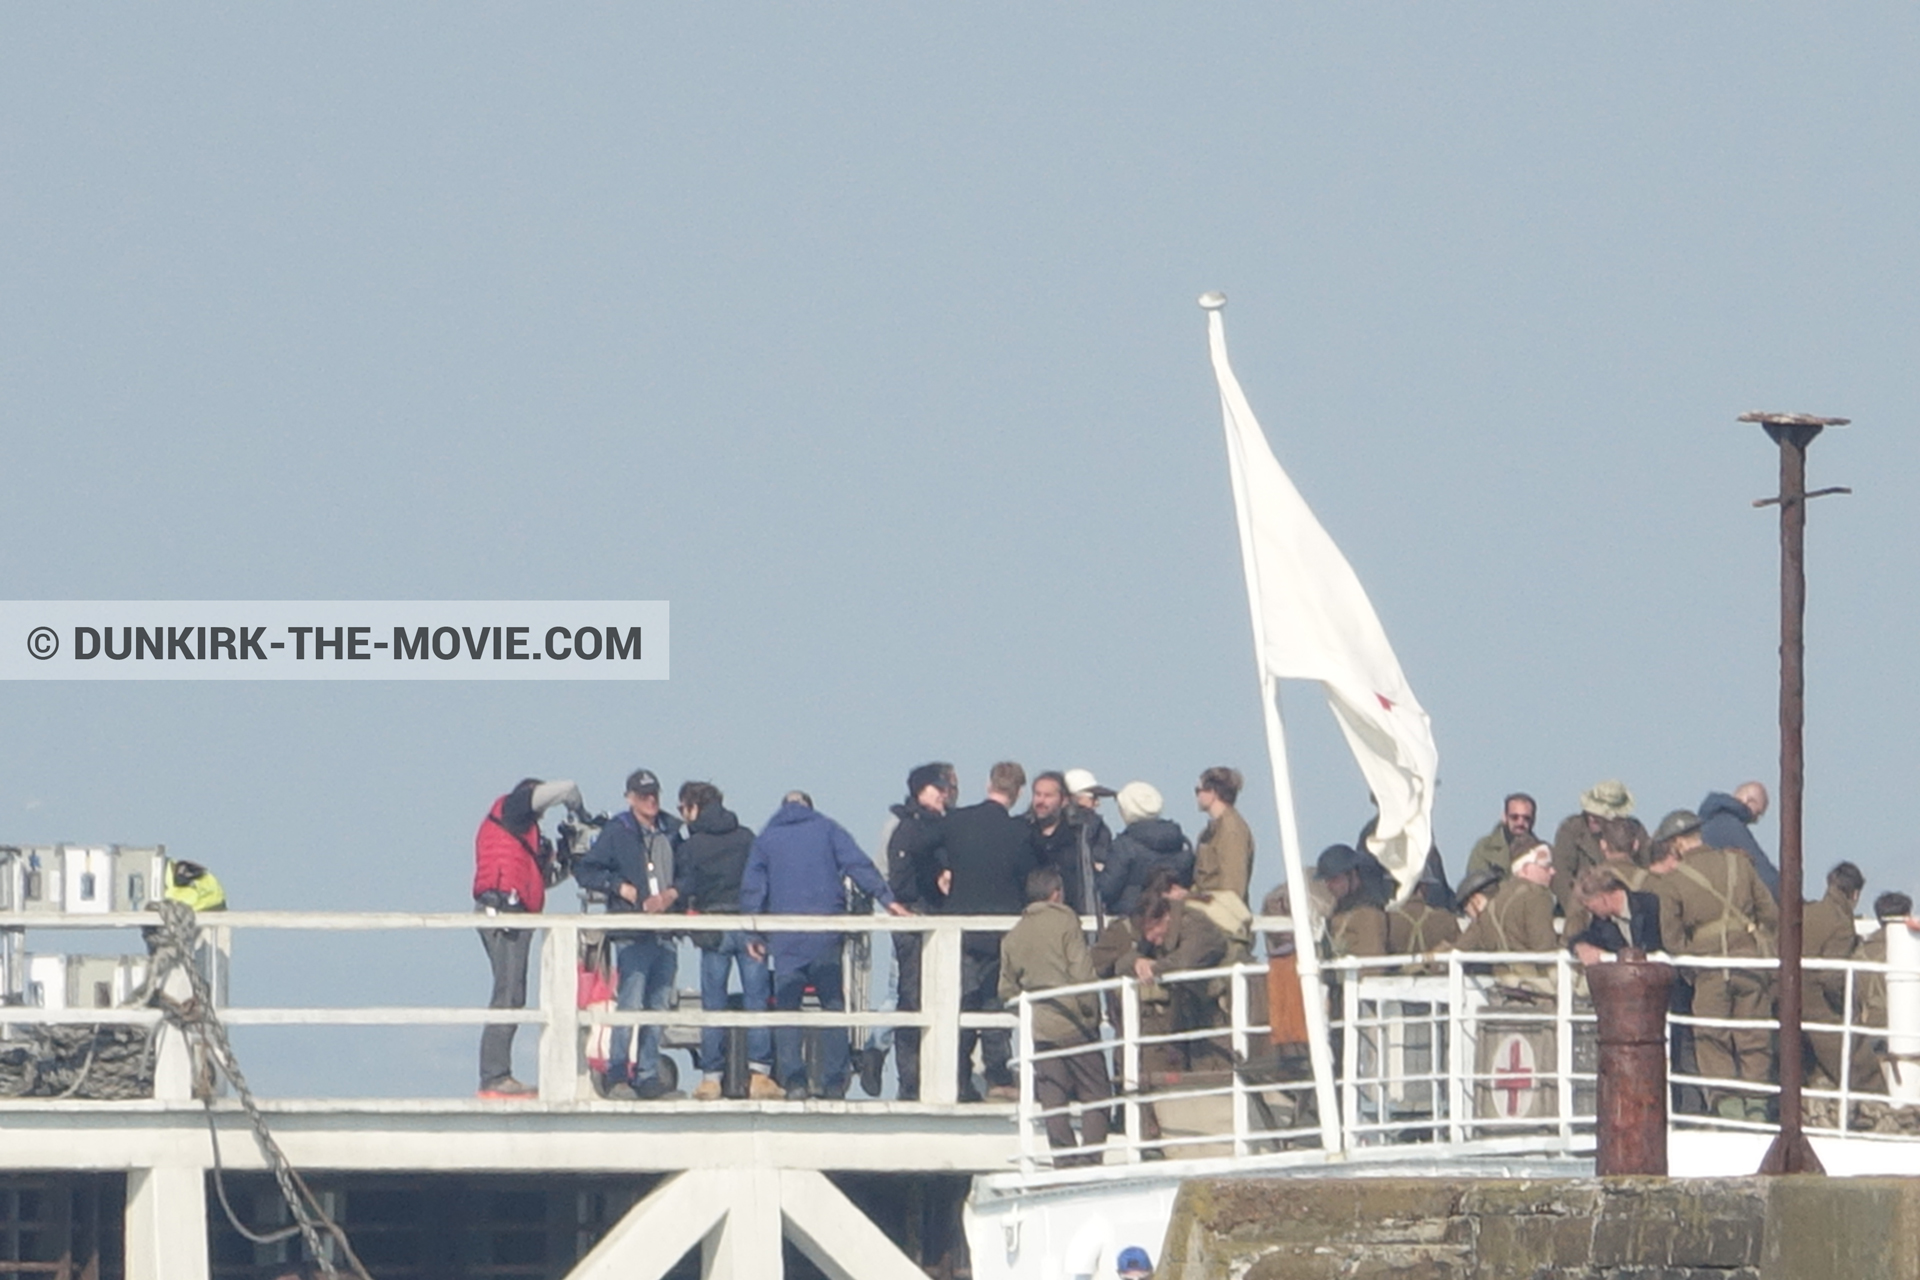 Picture with supernumeraries, Hoyte van Hoytema, EST pier, Christopher Nolan, technical team, M/S Rogaland,  from behind the scene of the Dunkirk movie by Nolan